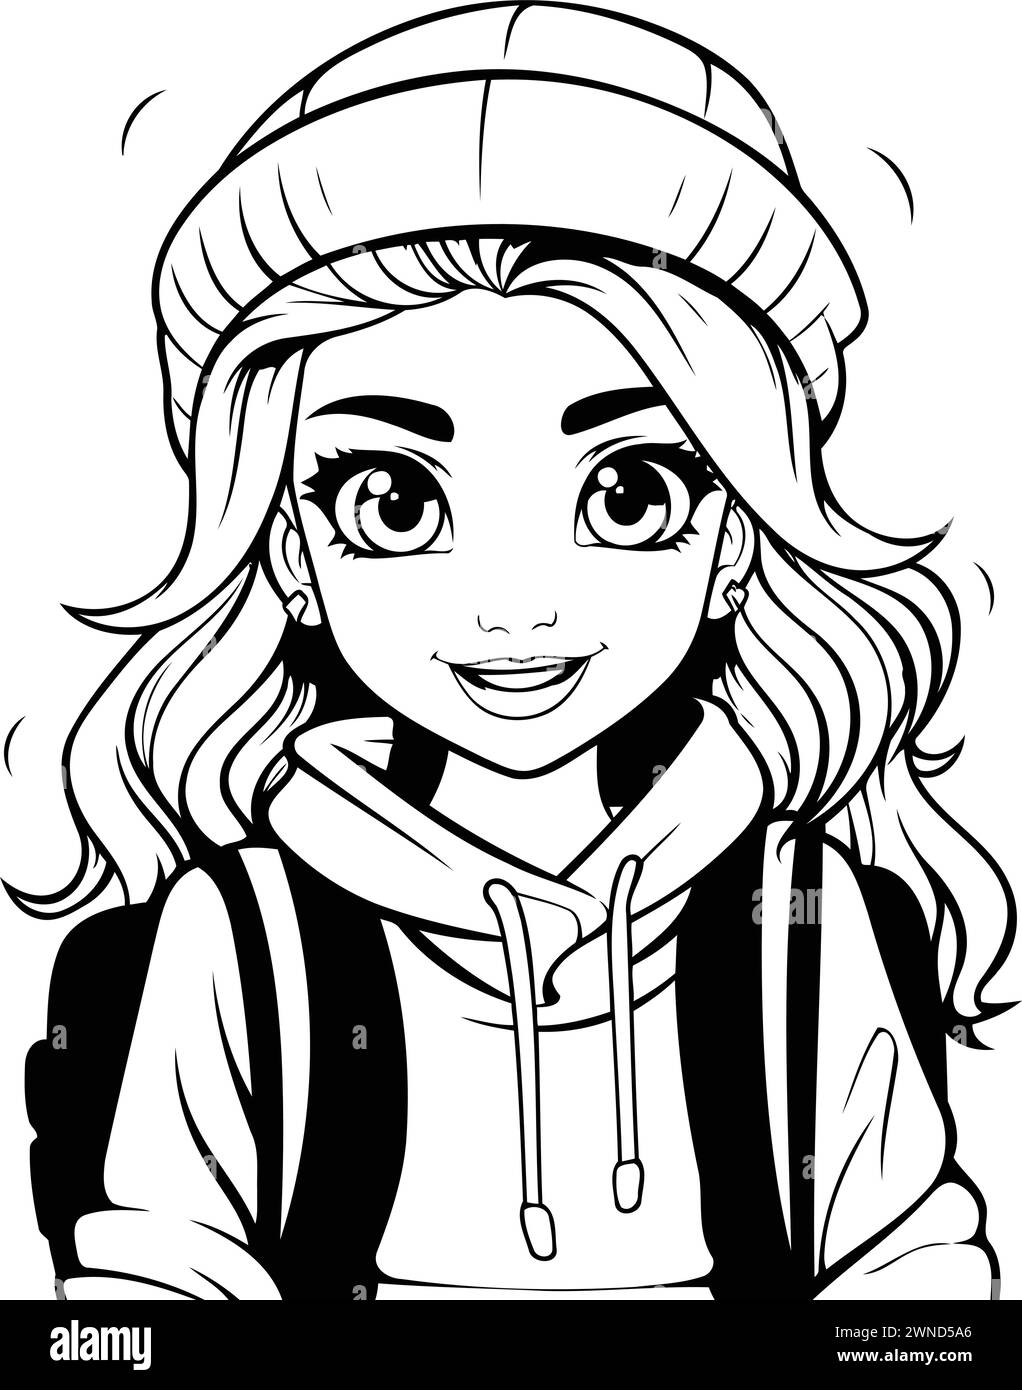 Black and White Cartoon Illustration of Teenage Girl Student Wearing Winter Cap for Coloring Book Stock Vector